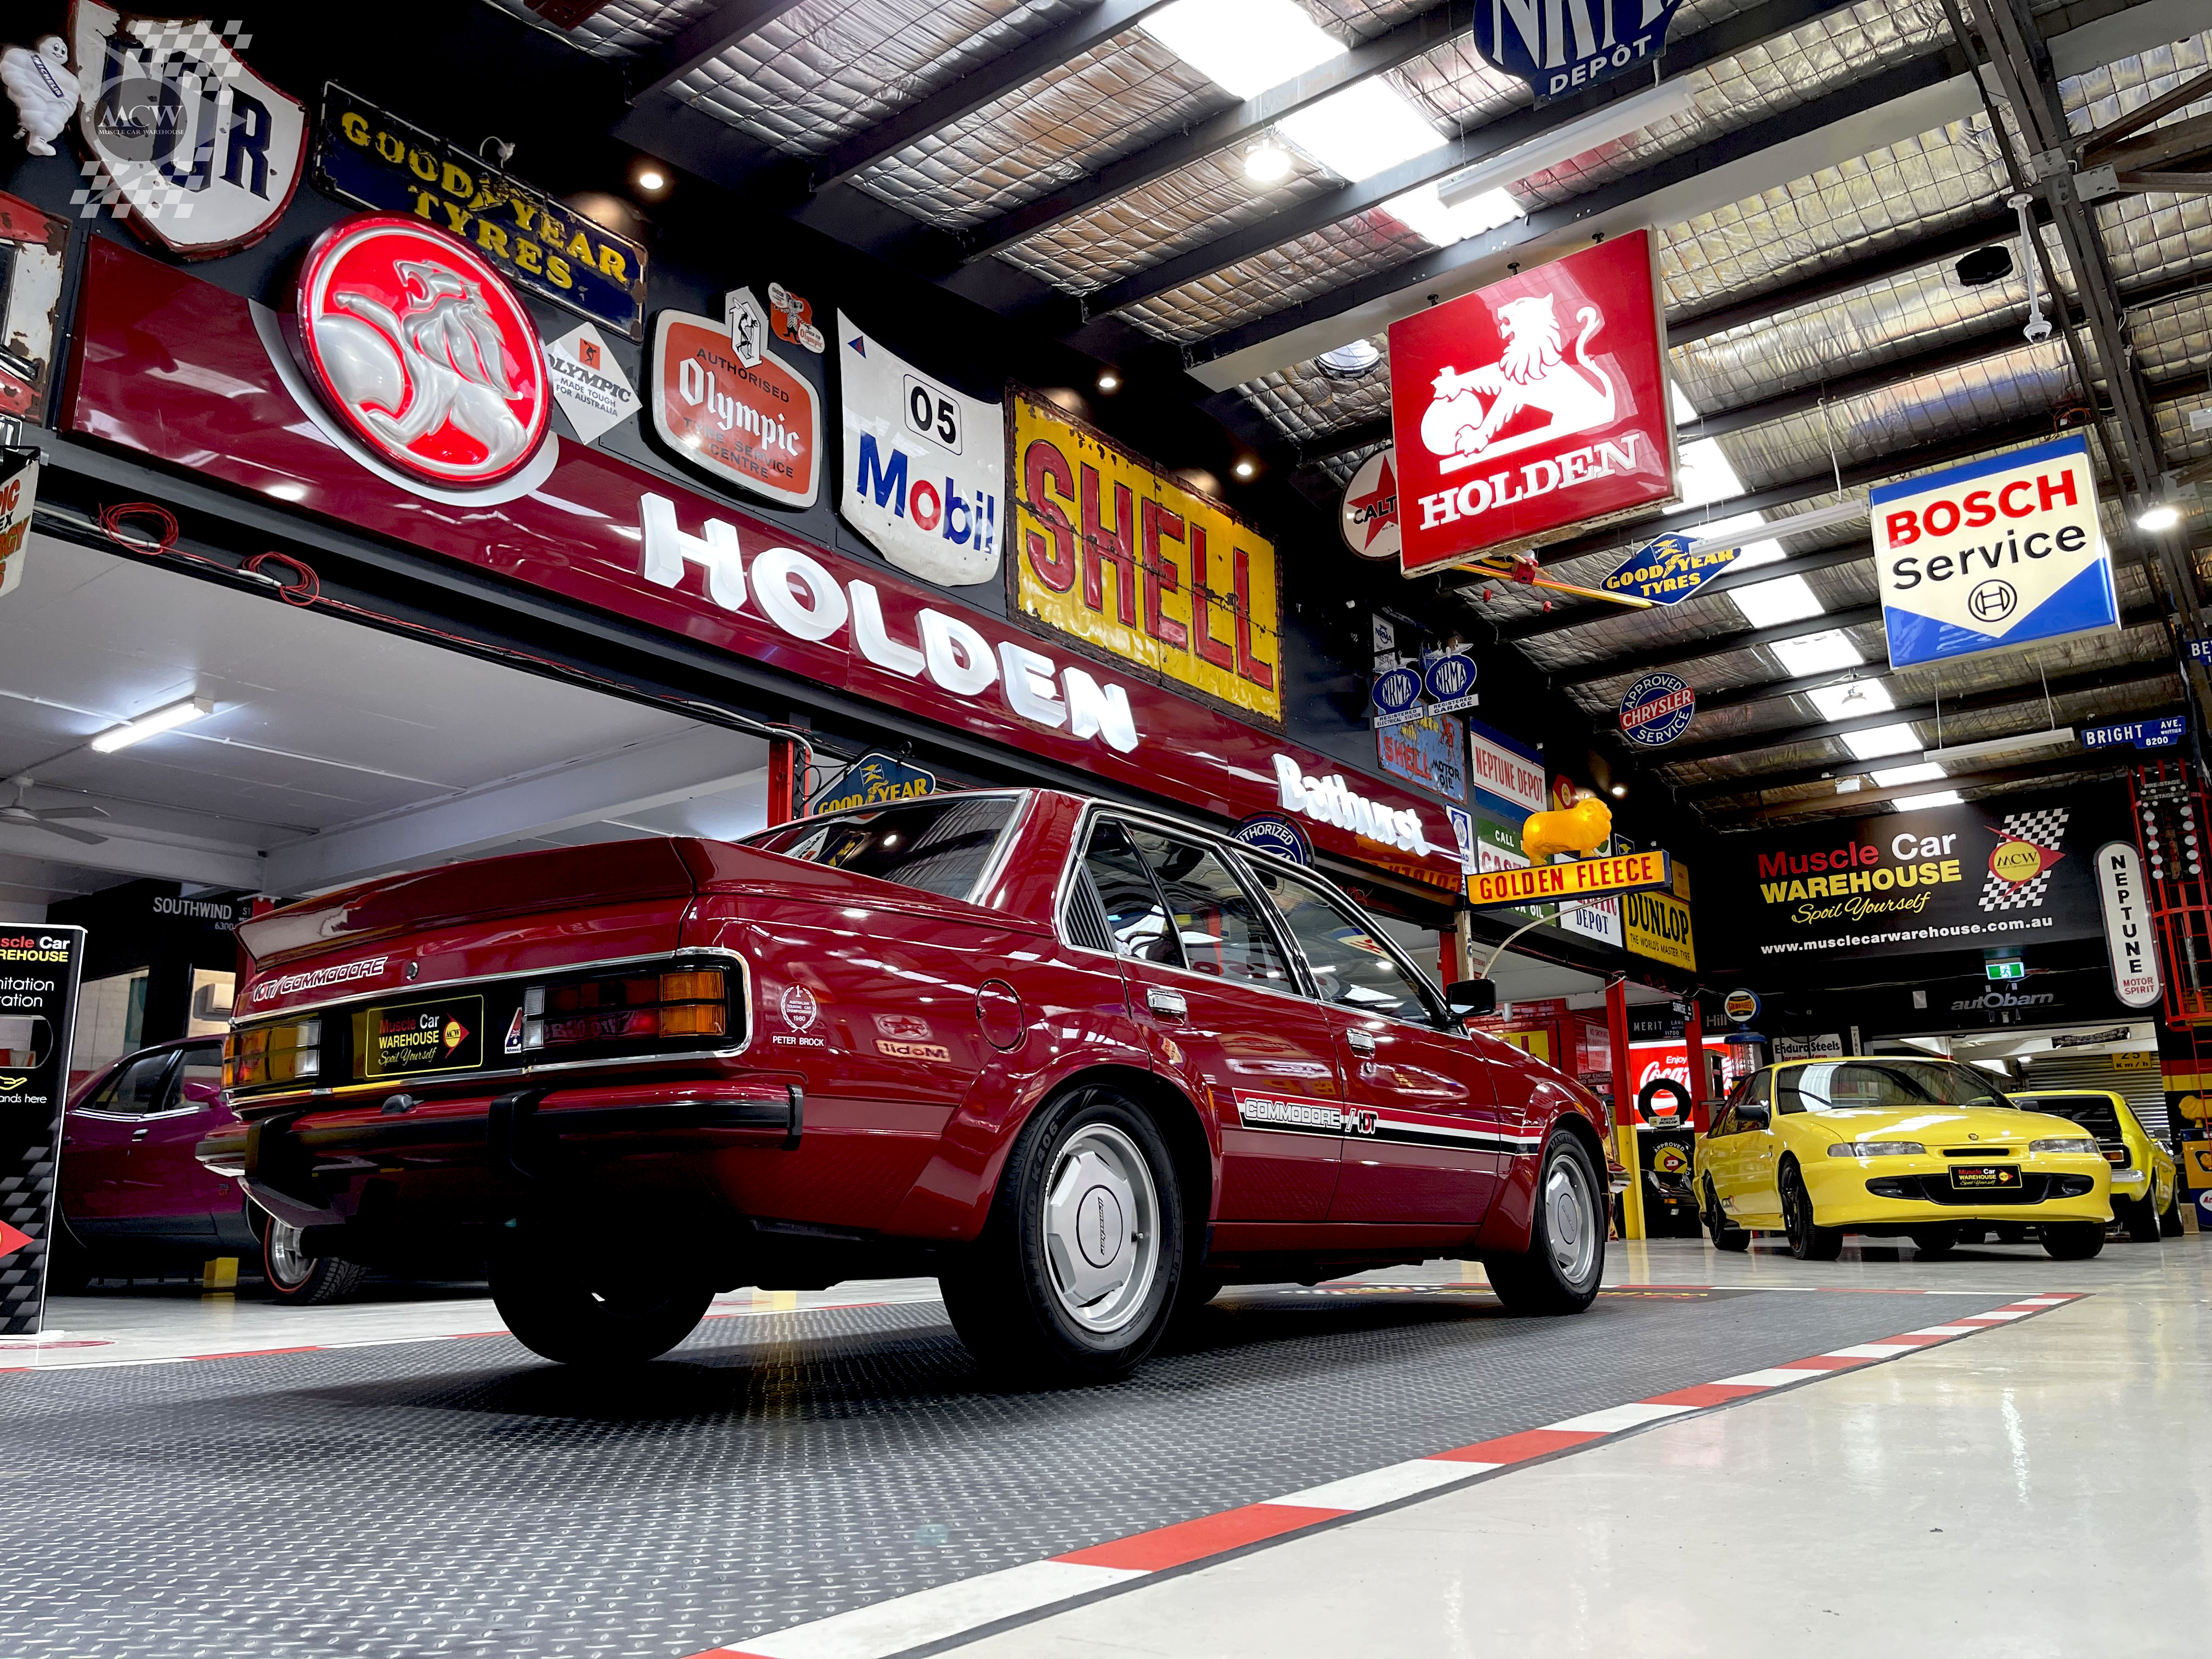 HDT VC Brock Commodore - Muscle Car Warehouse